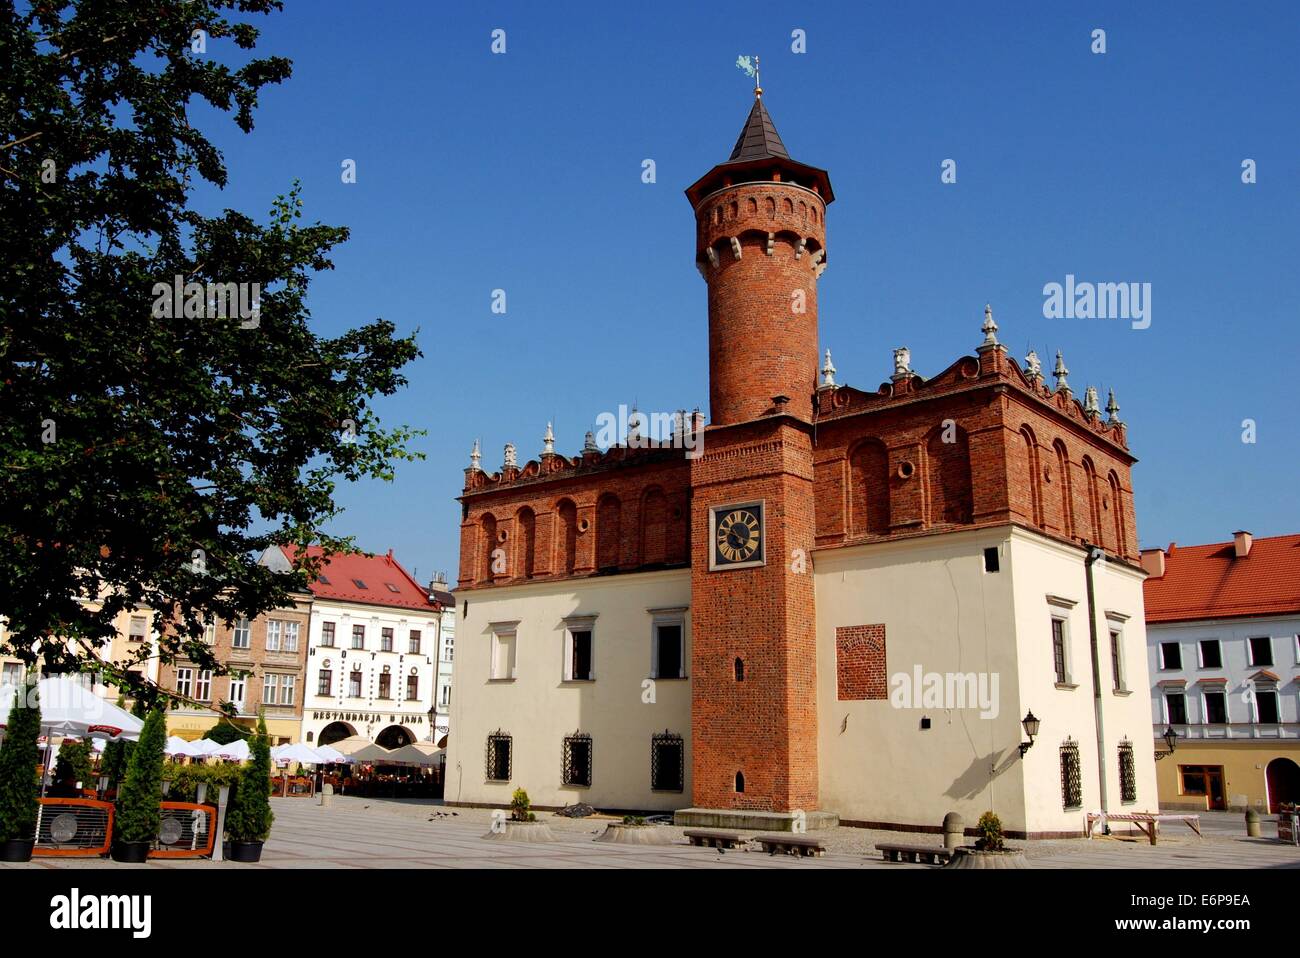 TARNÓW, POLAND: The imposing Renaissance style Ratusz (Town Hall) with its medieval tower sits in the Rynek Market Square Stock Photo